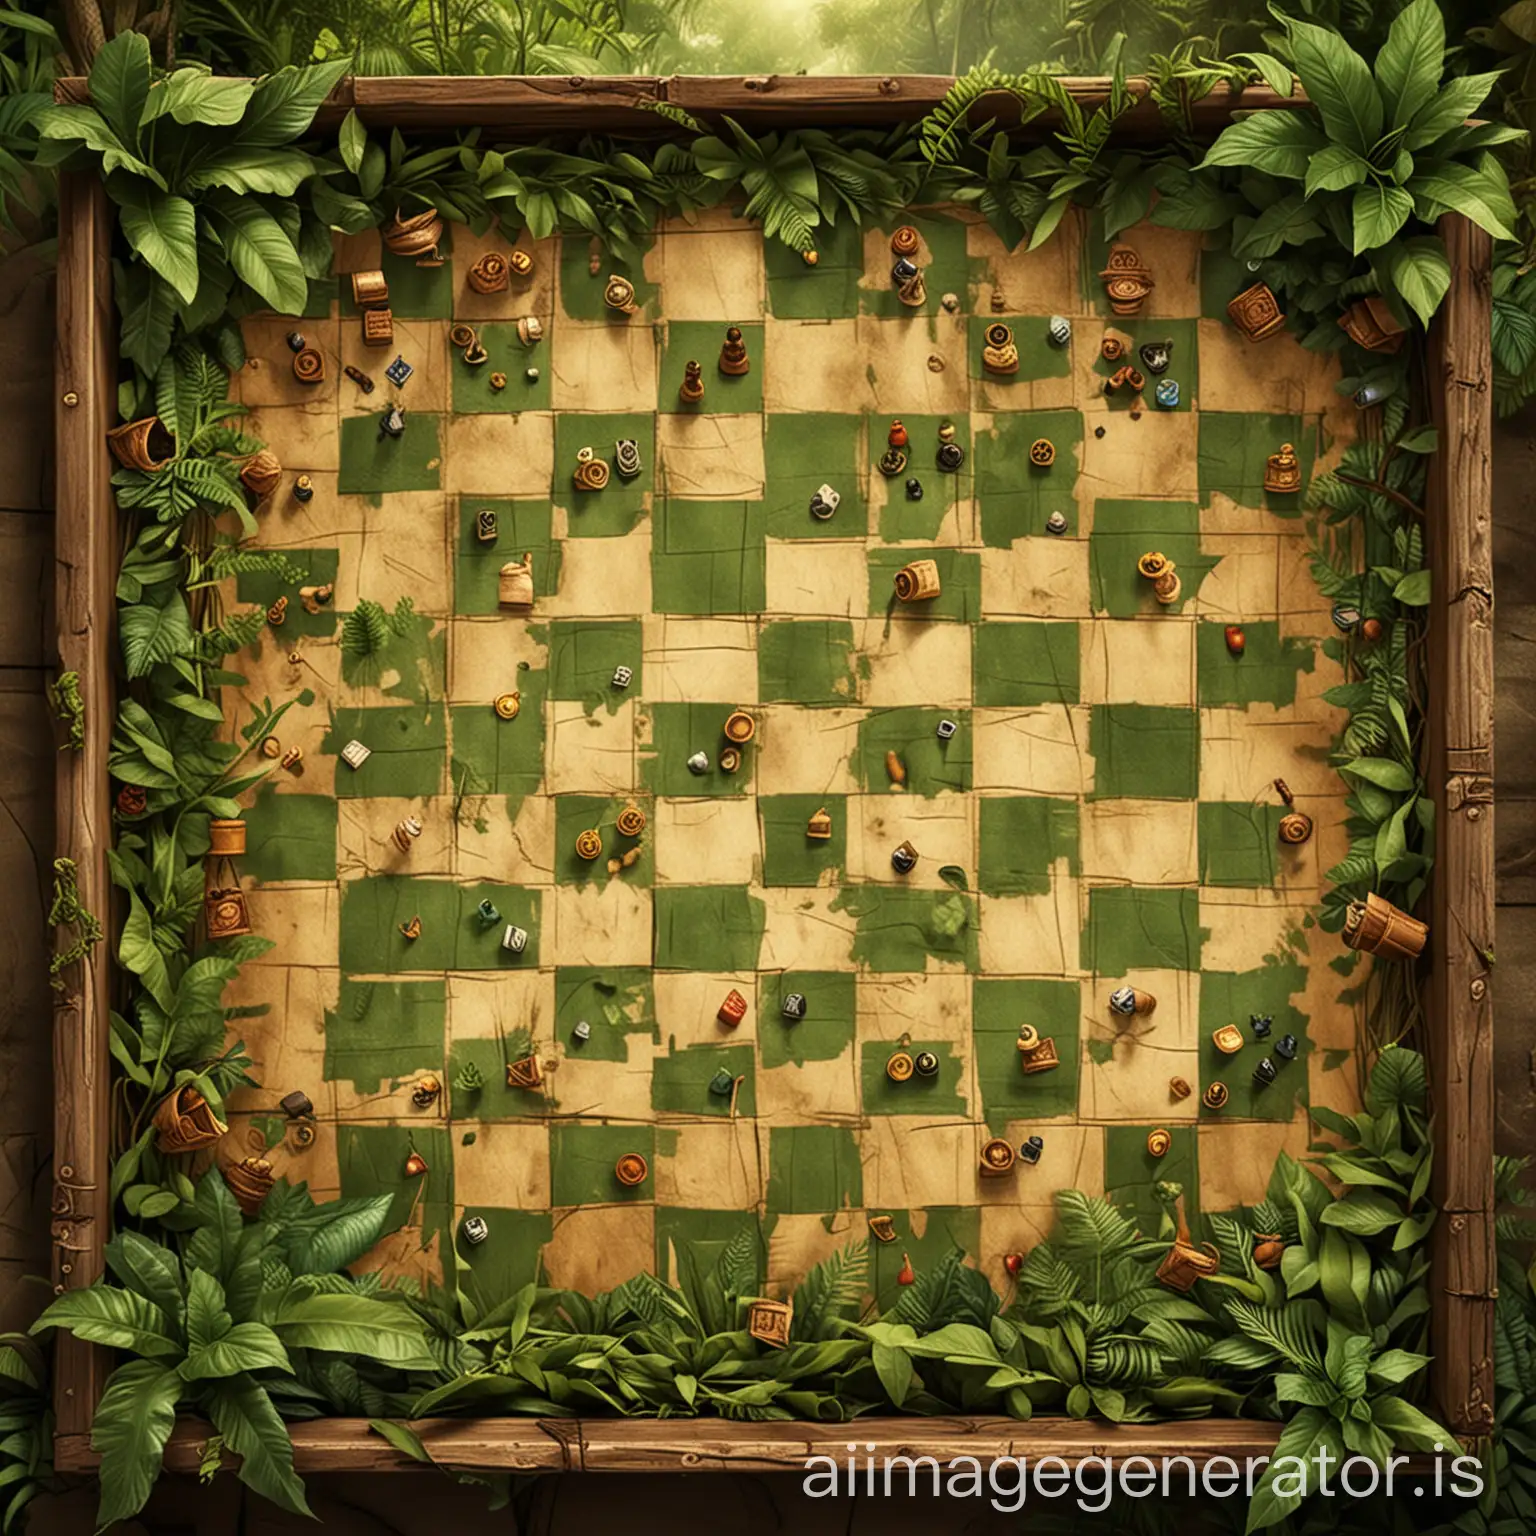 treasure hunt board game background, I need it box by box, consider it is a 2d view and consist 50 square box and it should me in jungle theme, it should be like chess board